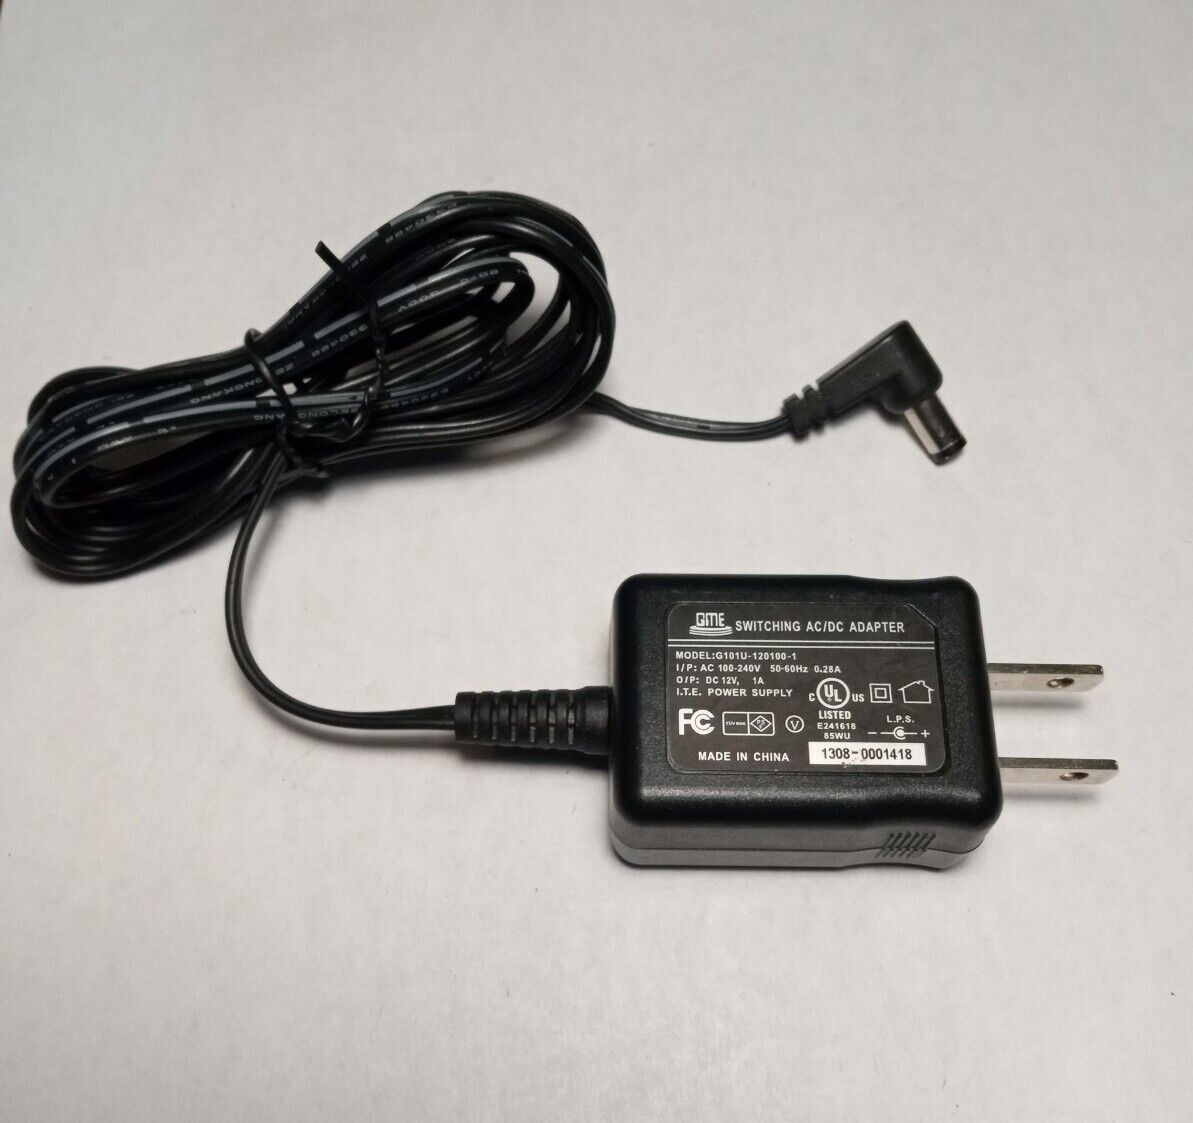 GME G101U-120100-1 Switching AC/DC Power Adapter 12V 1A (Barrel Plug) Tested Brand: GME Type: AC/AC Adapter Connec